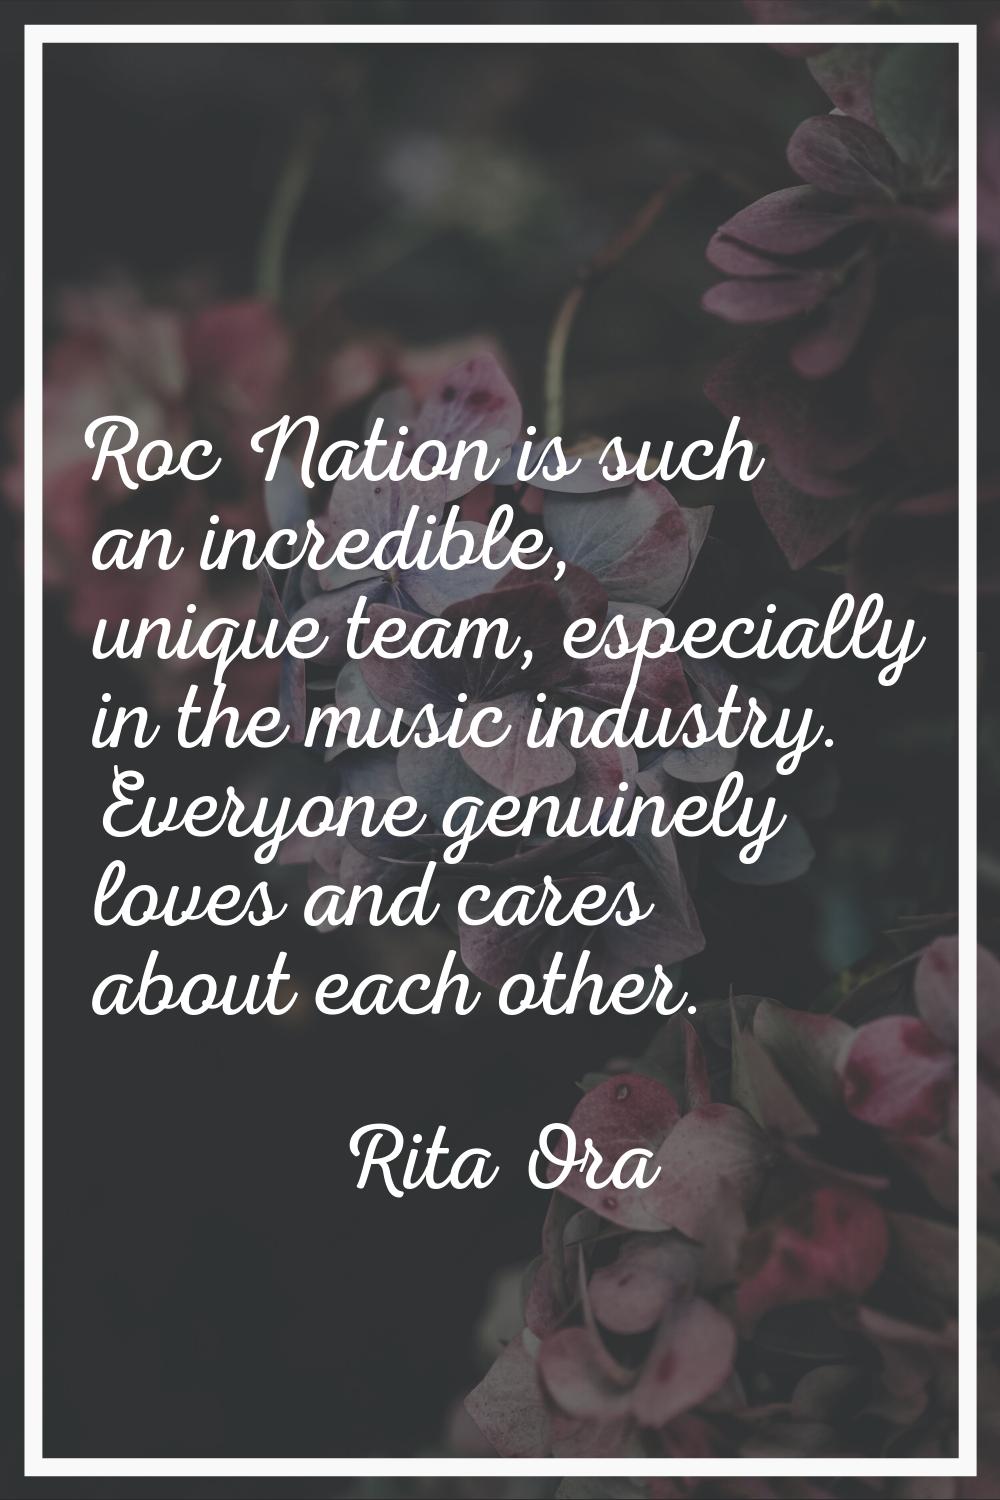 Roc Nation is such an incredible, unique team, especially in the music industry. Everyone genuinely